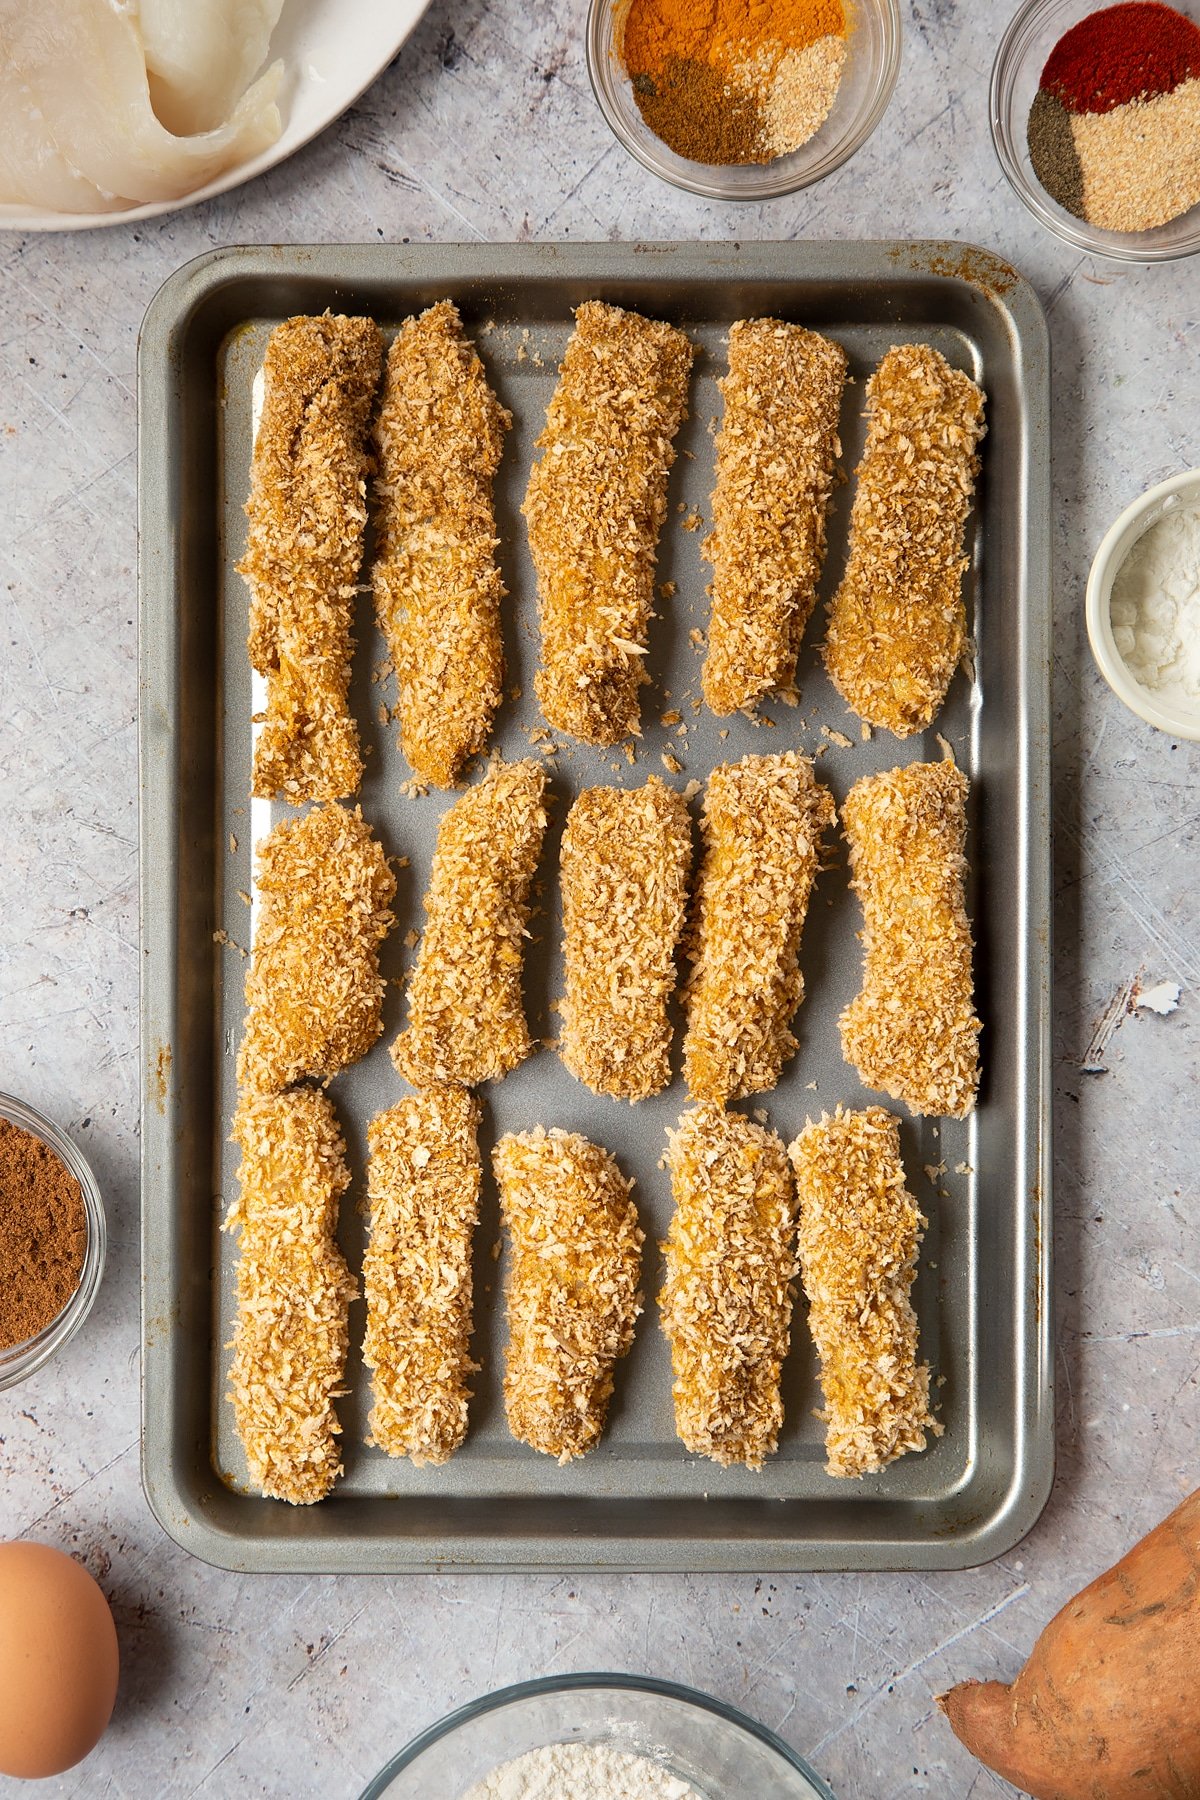 Breaded fish sticks arranged on a baking tray. Surrounding the tray is ingredients for spicy fish sticks.